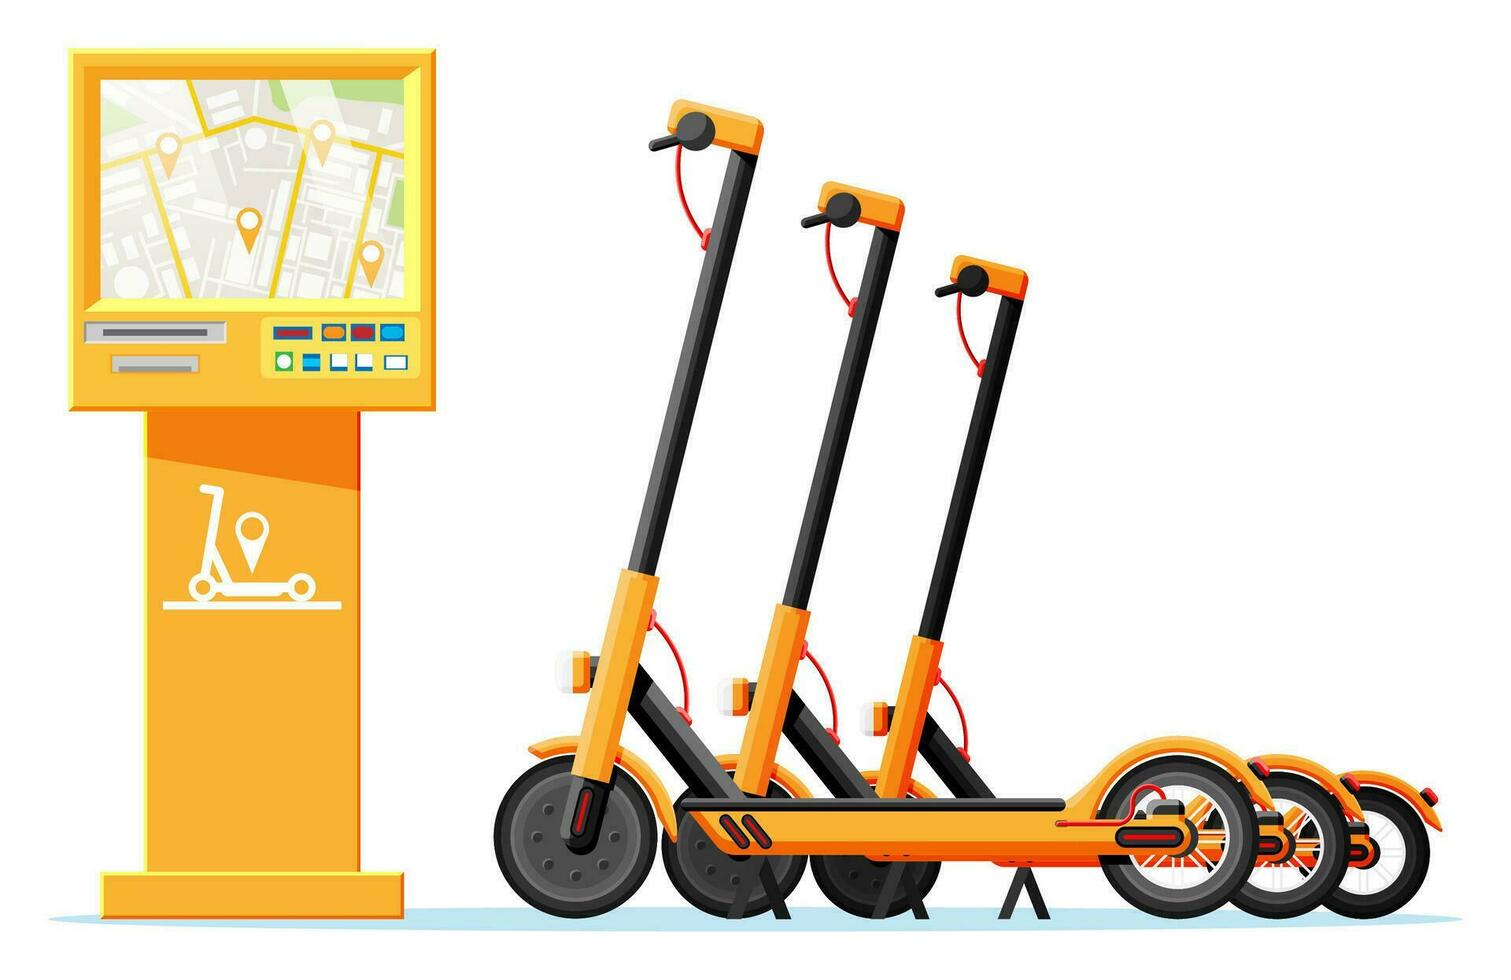 Renting Electric Scooter Concept. Electric Terminal and Kick Scooter. Rent of Scooters Service, Rental Sharing App. Modern Urban Transportation. Cartoon Flat Vector Illustration